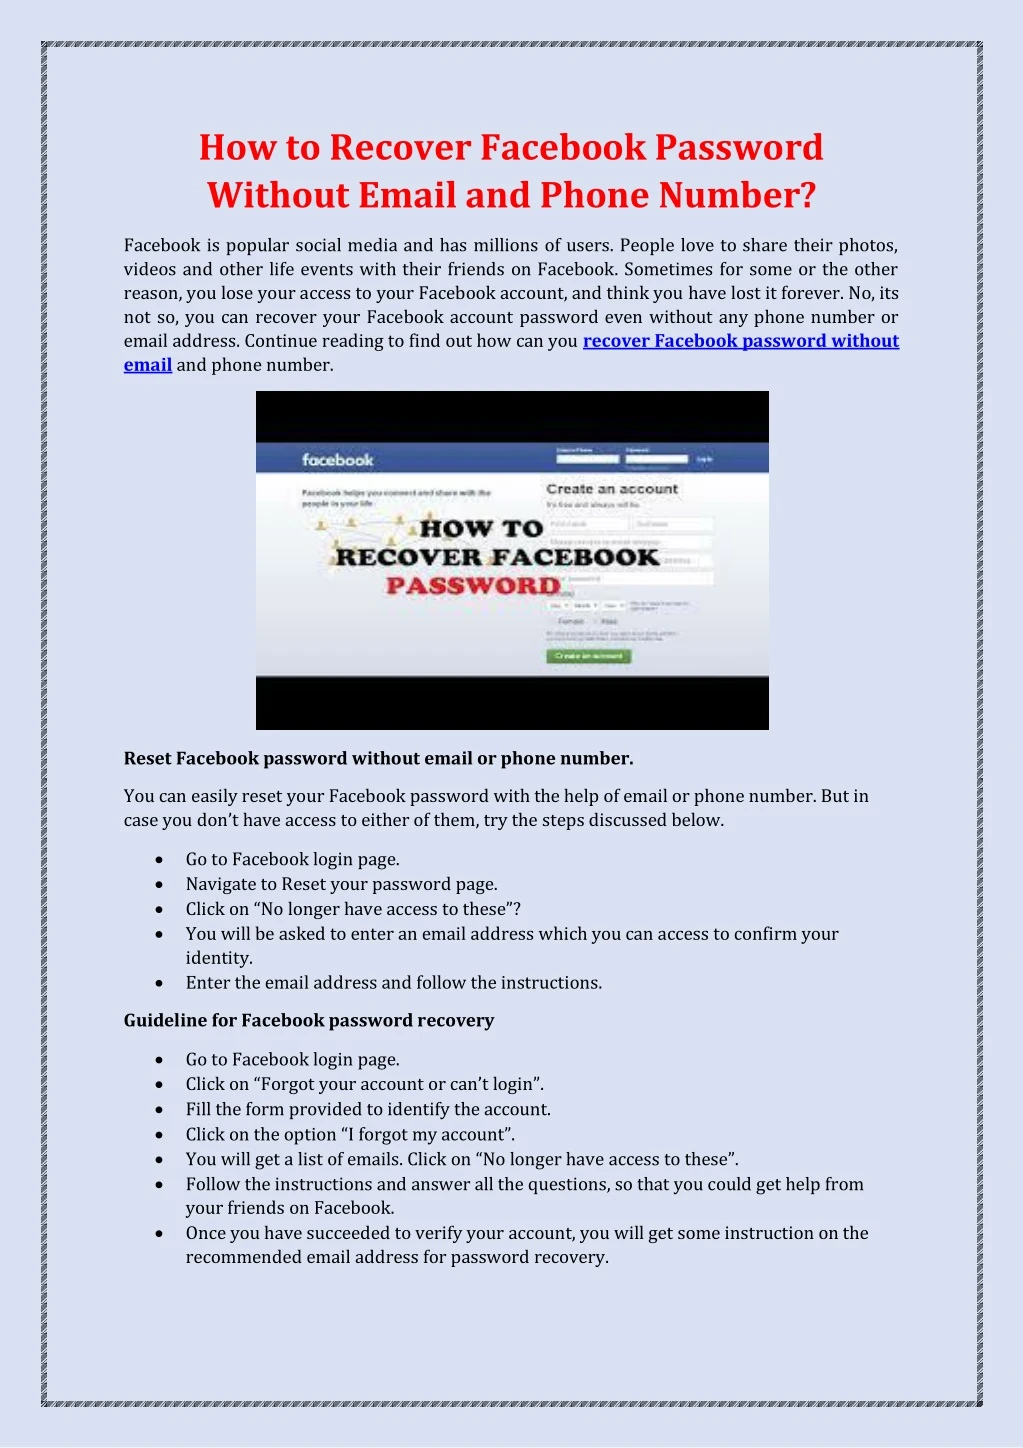 how to recover facebook password without email